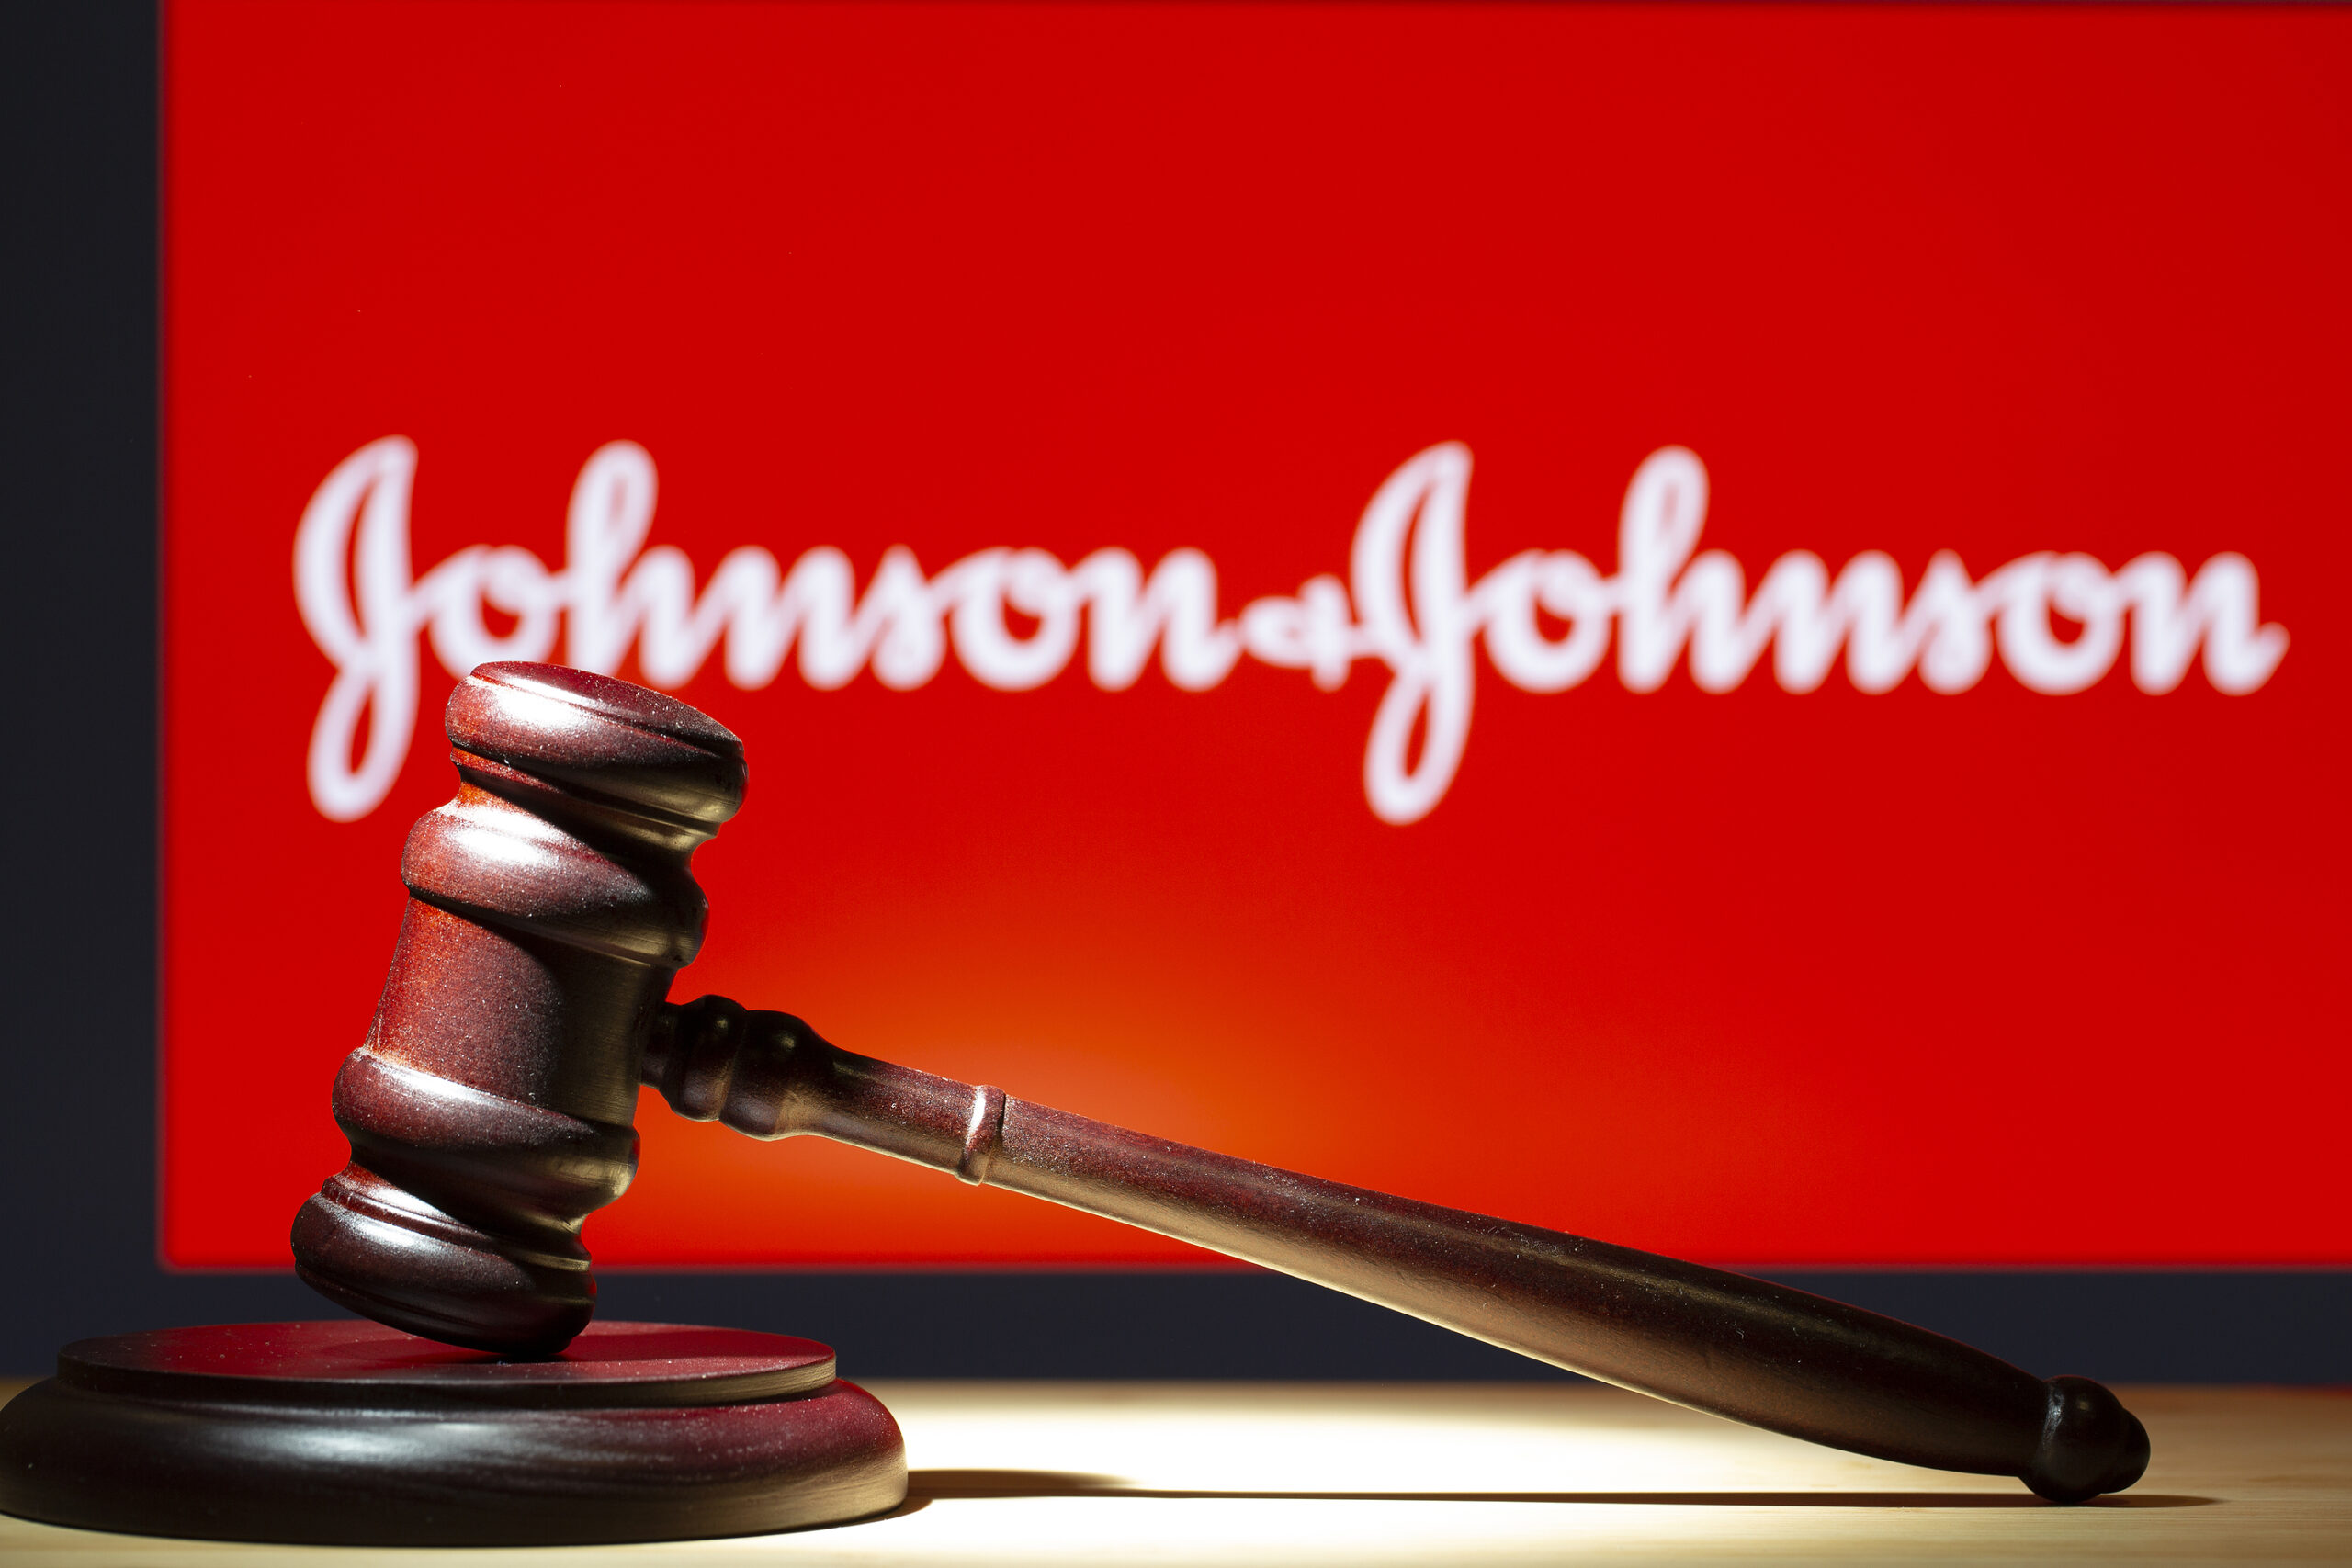 J&J must pay $18.8 million to cancer patient in baby powder lawsuit